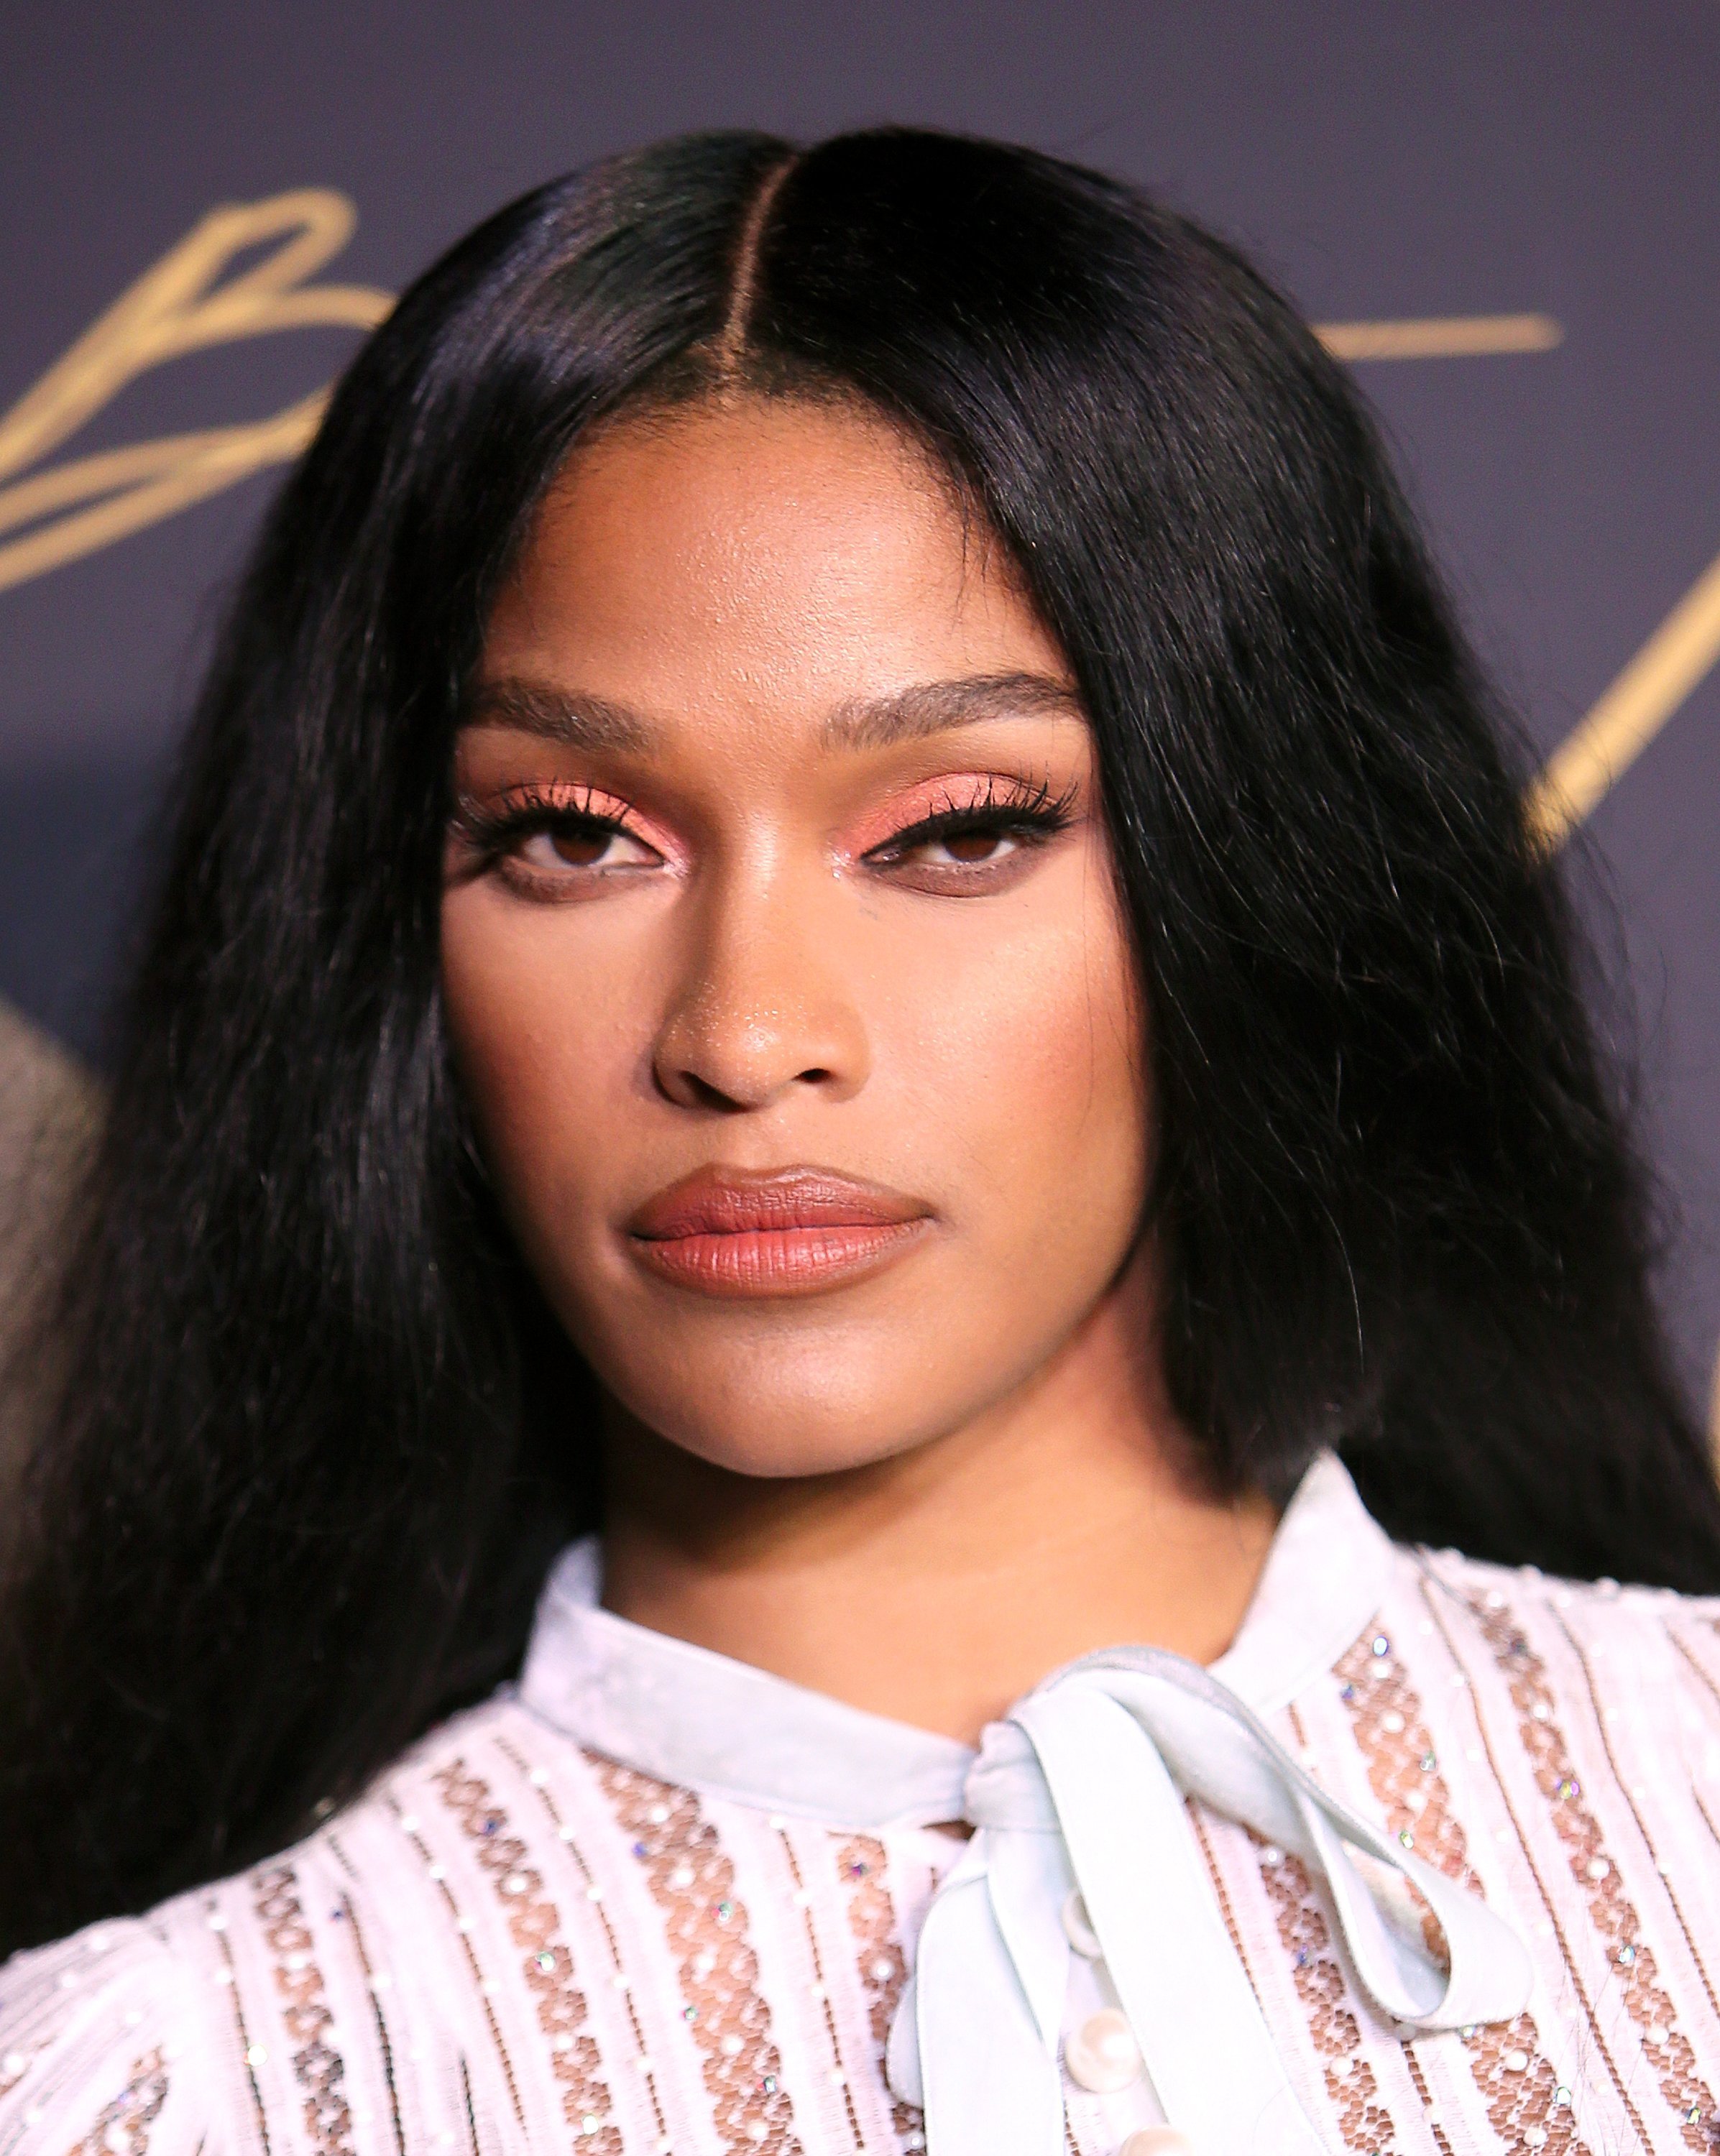 Joseline Hernandez at the 2017 Maxim Hot 100 Party. | Photo: Getty Images